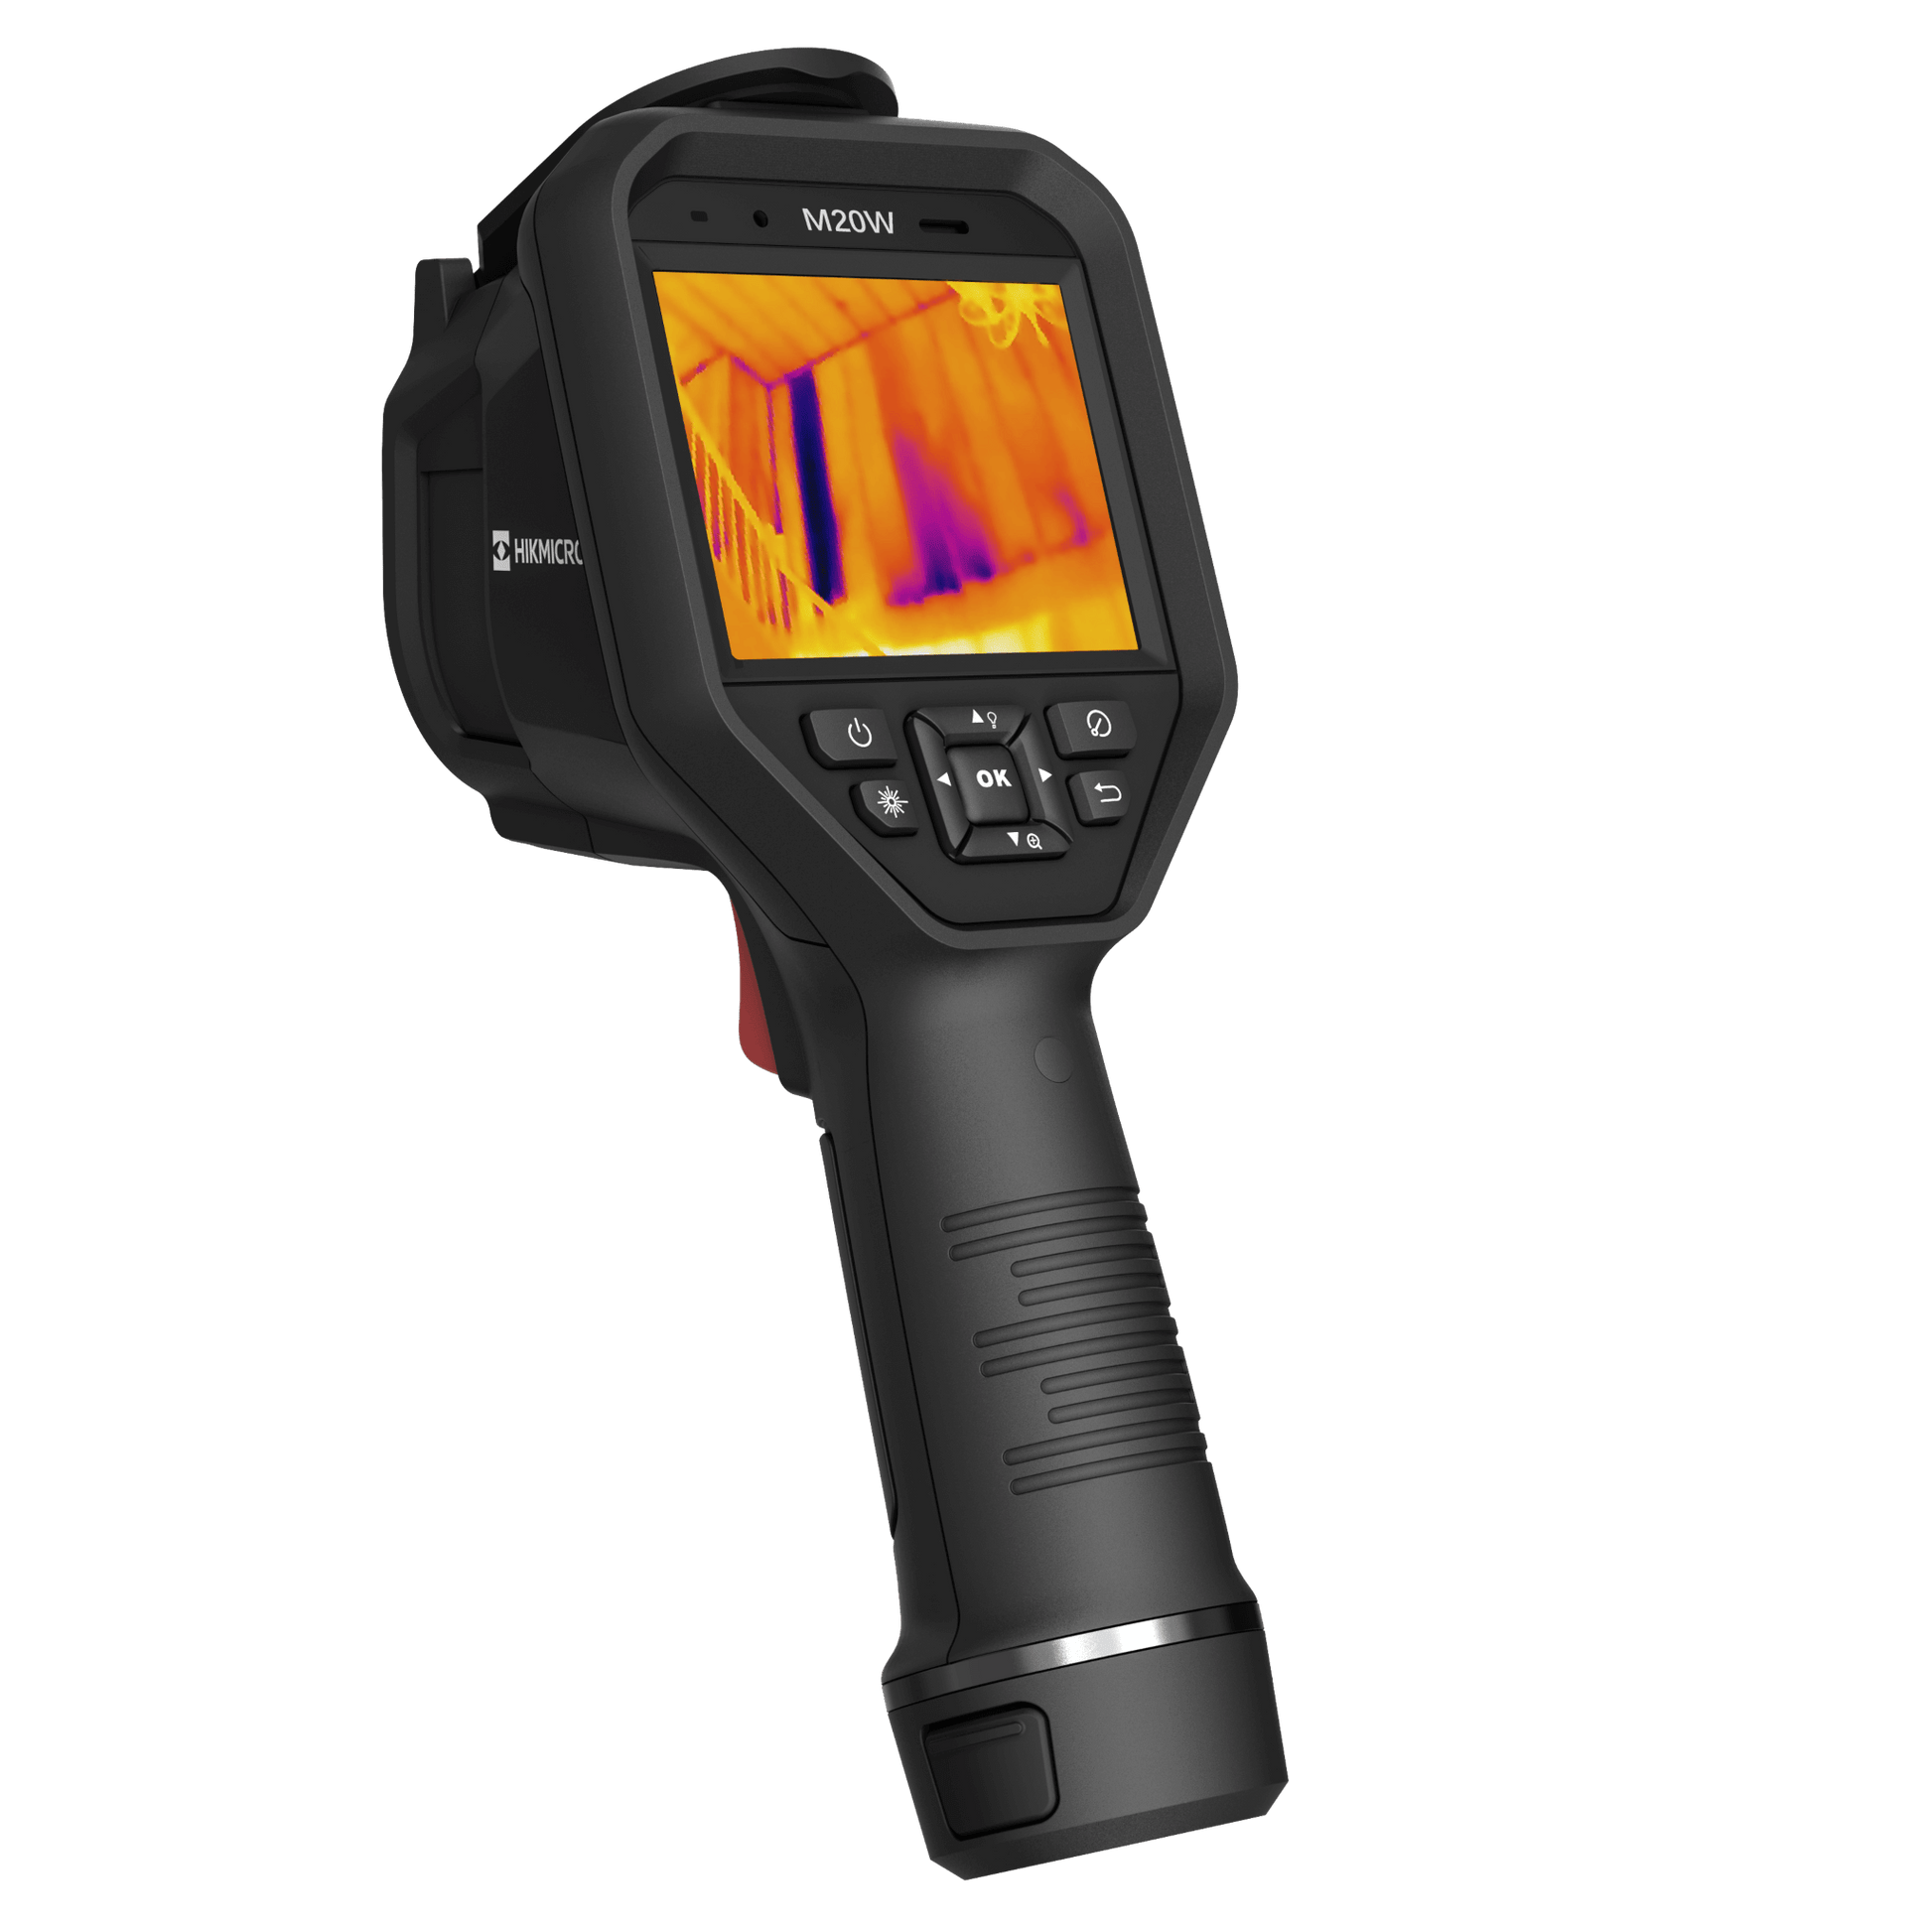 HikMicro M20W Handheld Thermography Camera on a transparent background - Rear left View